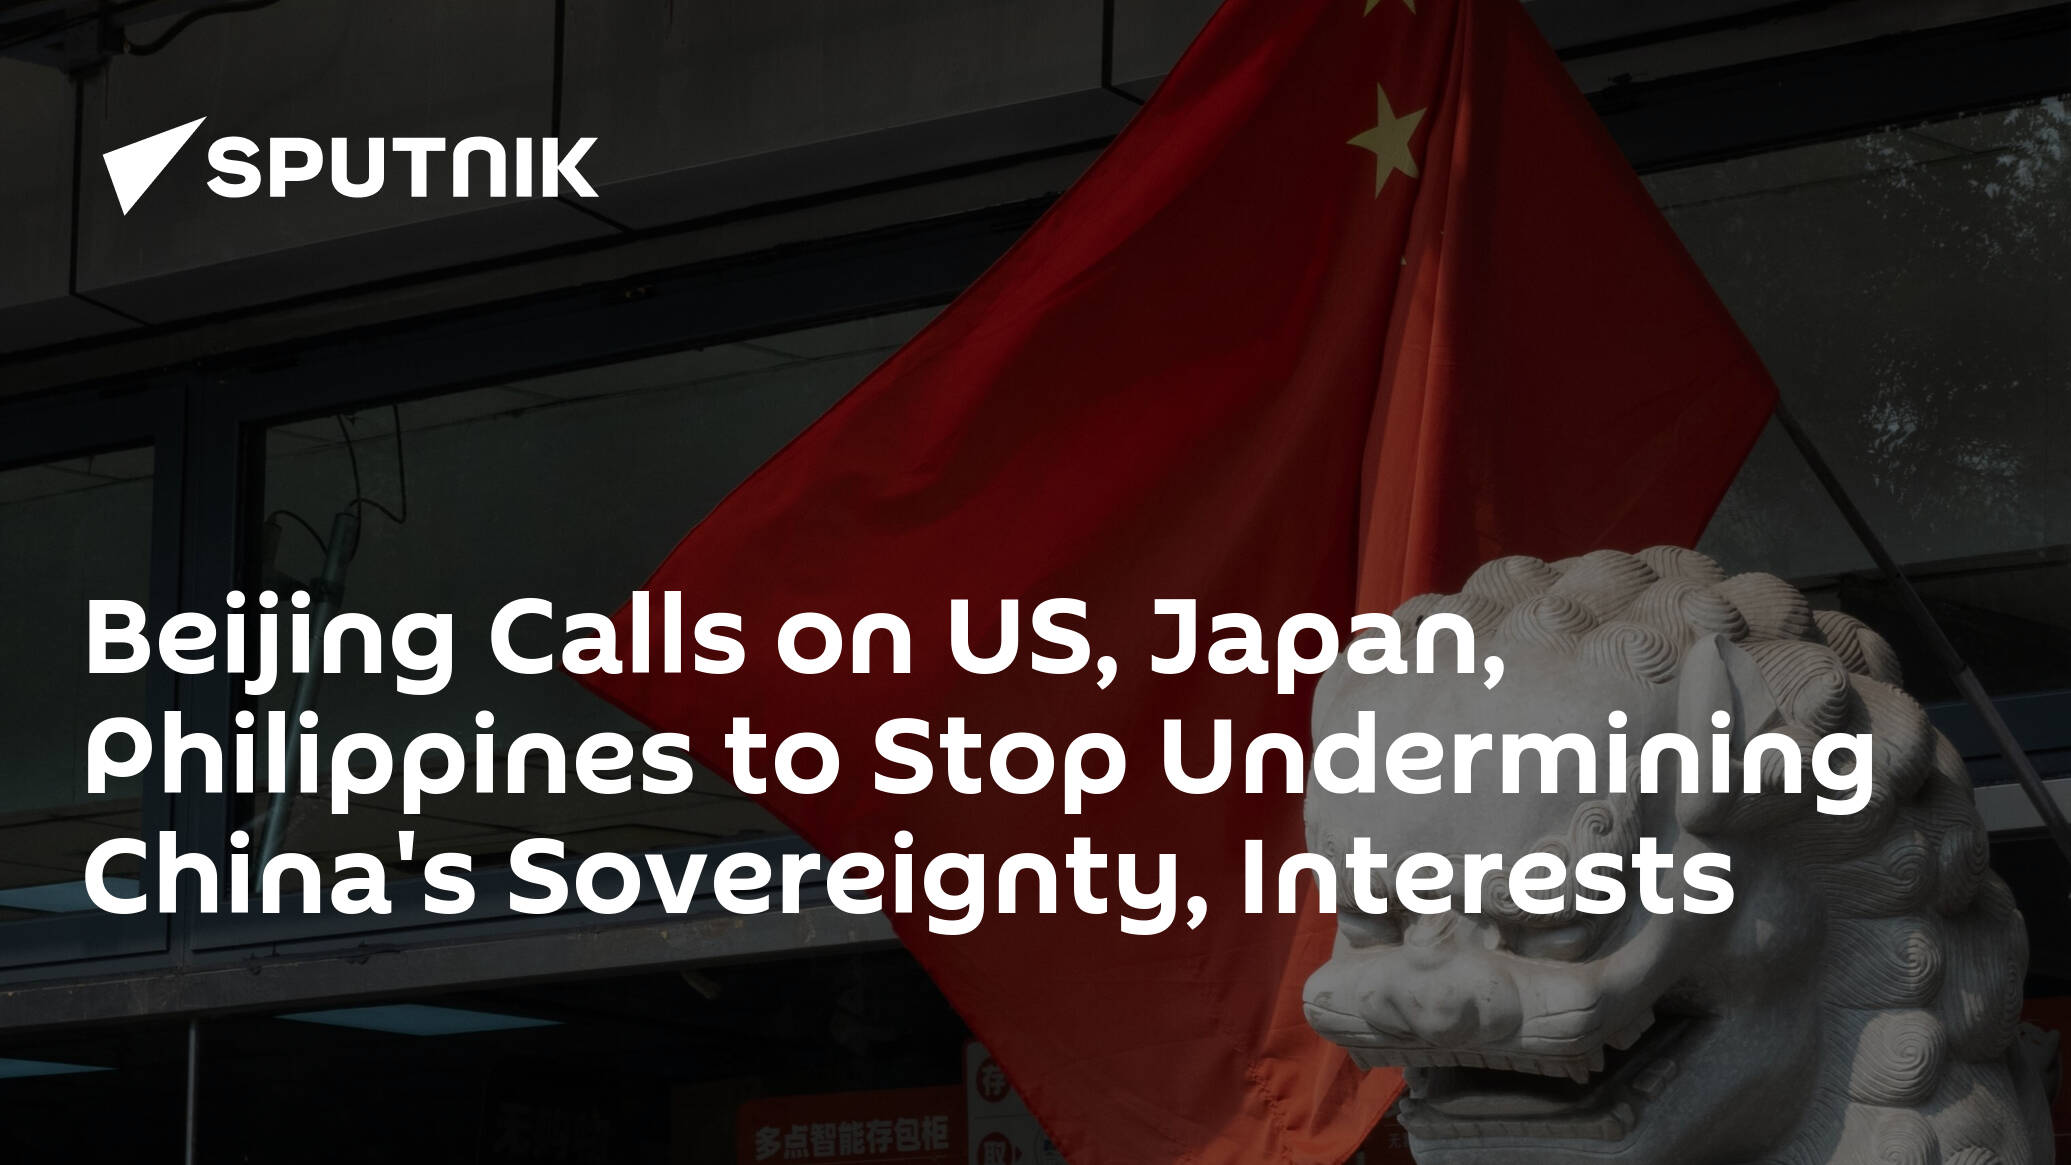 Beijing Calls on US, Japan, Philippines to Stop Undermining China's Sovereignty, Interests